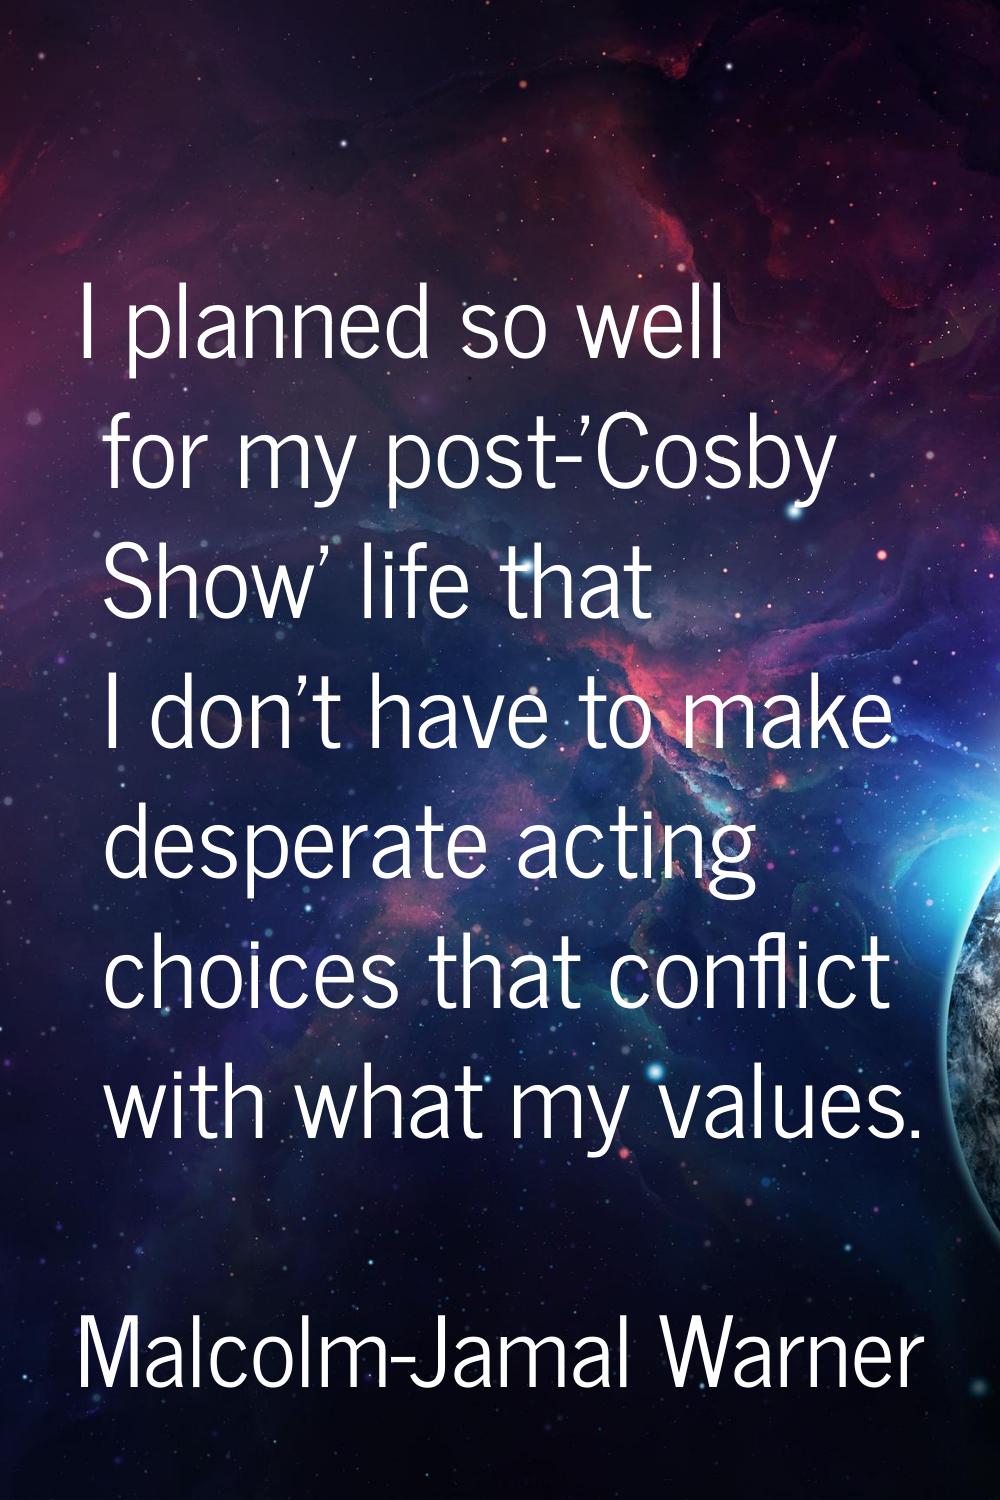 I planned so well for my post-'Cosby Show' life that I don't have to make desperate acting choices 